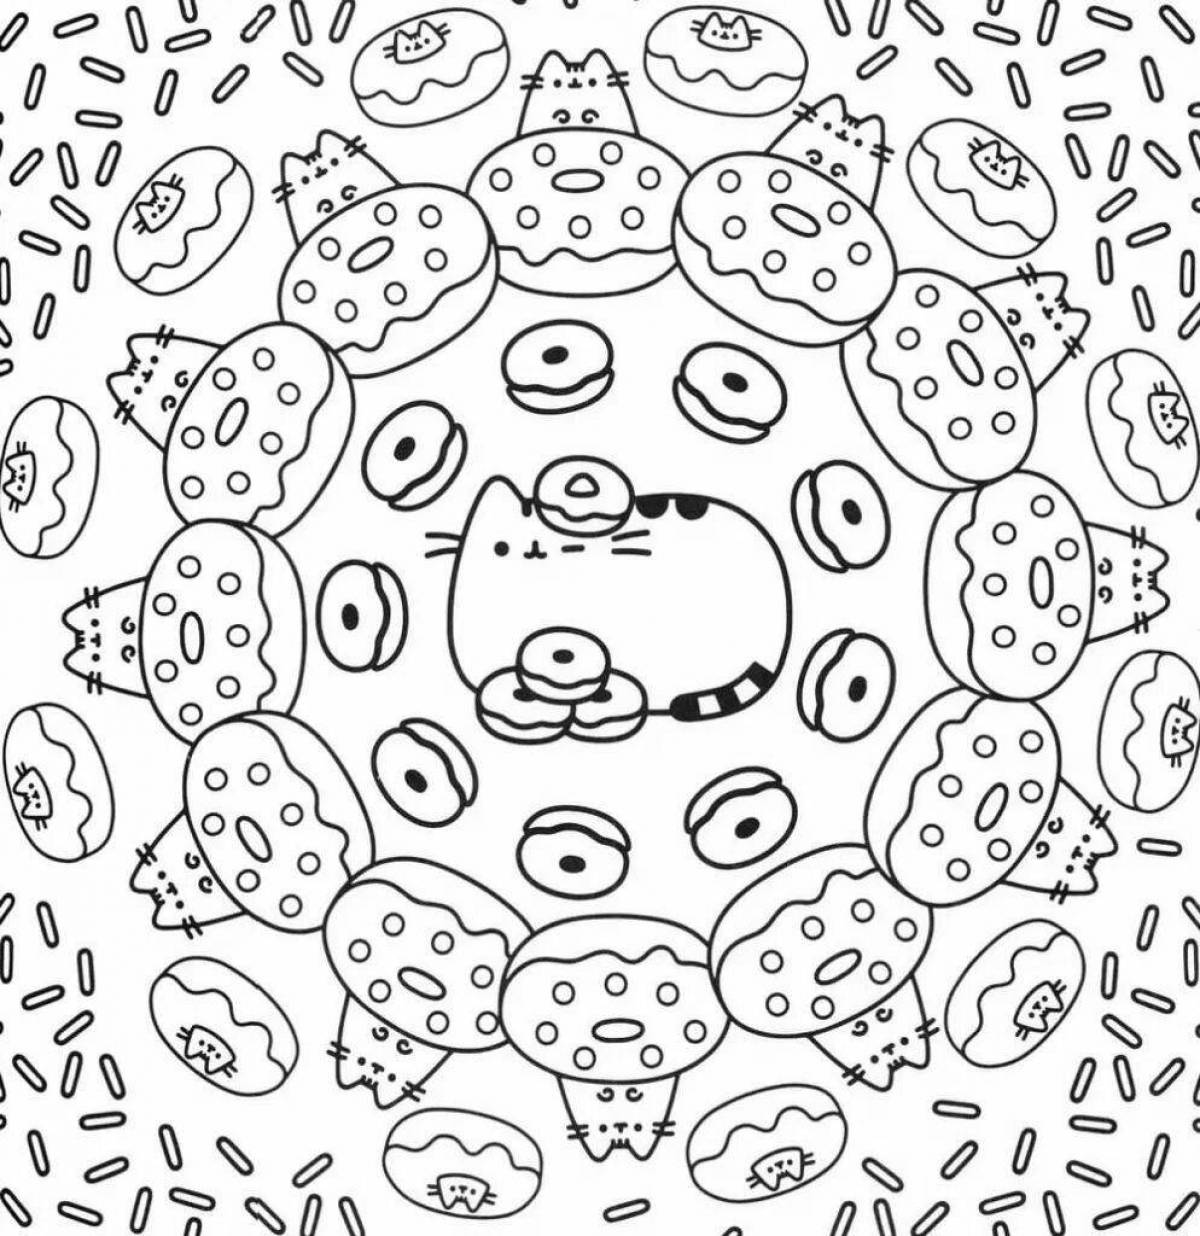 Donut cat coloring page live